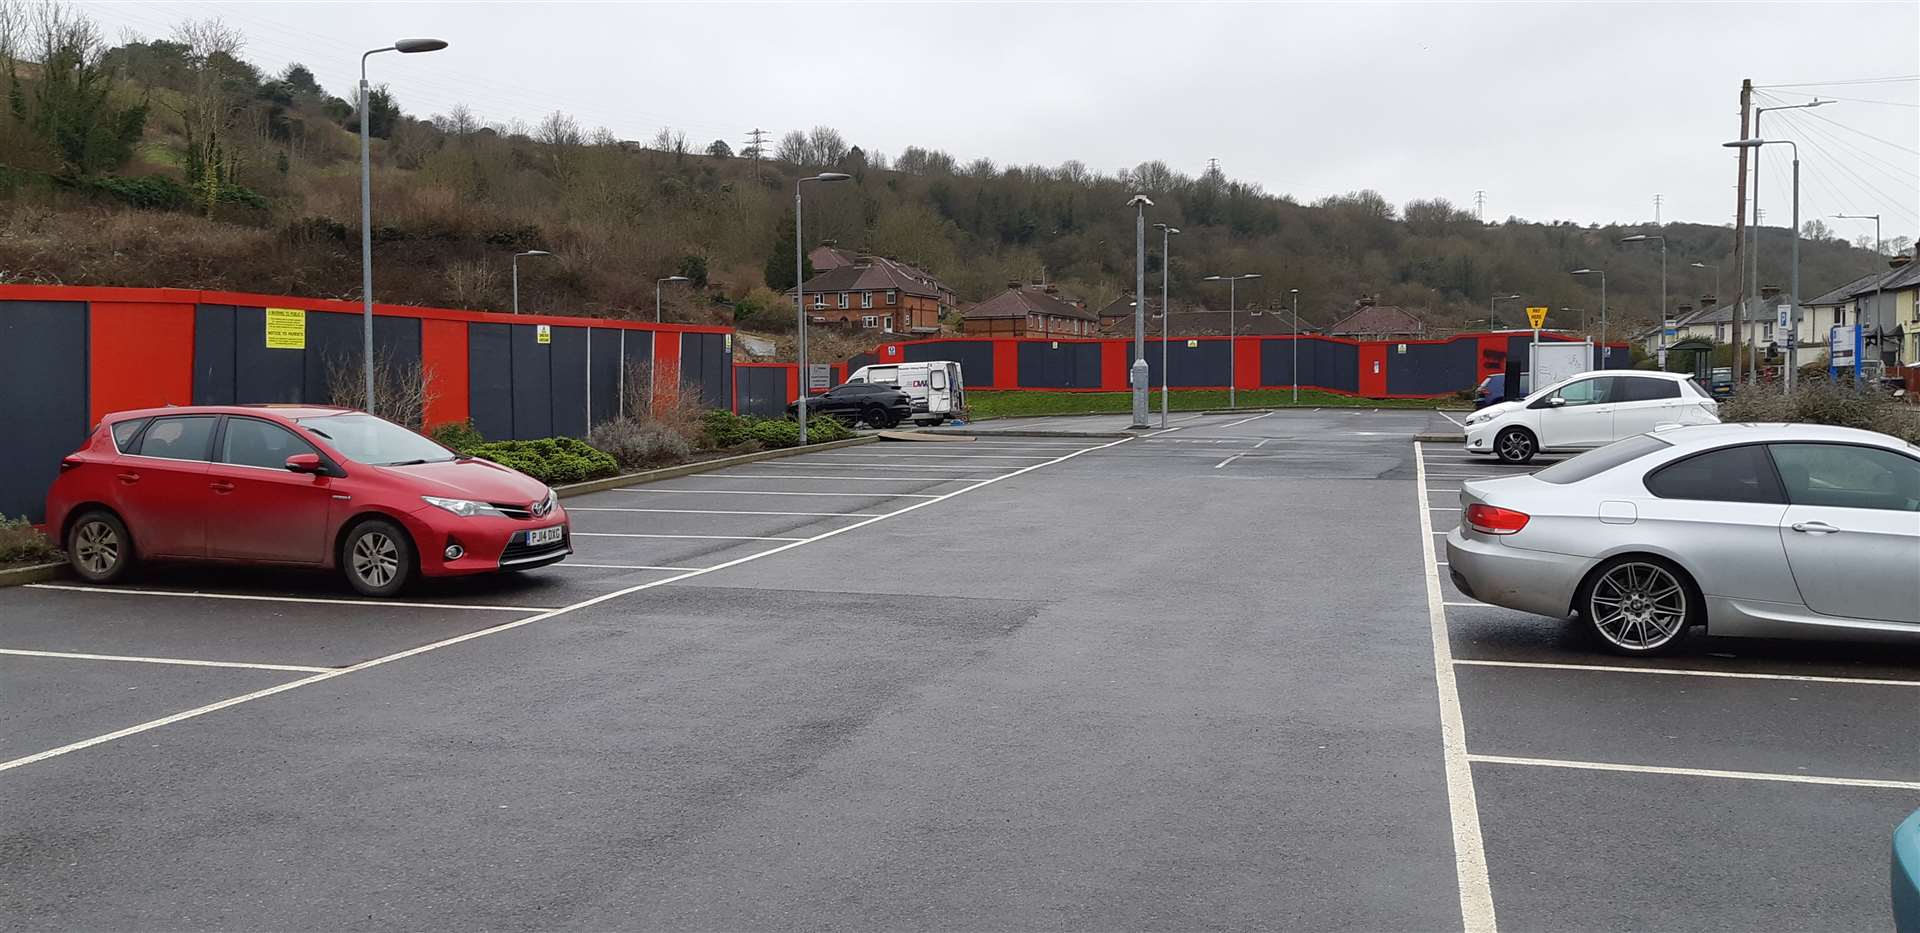 Buckland Hospital's overspill car park is regularly underused because hospital users park in free bays on the road which residents have to pay for